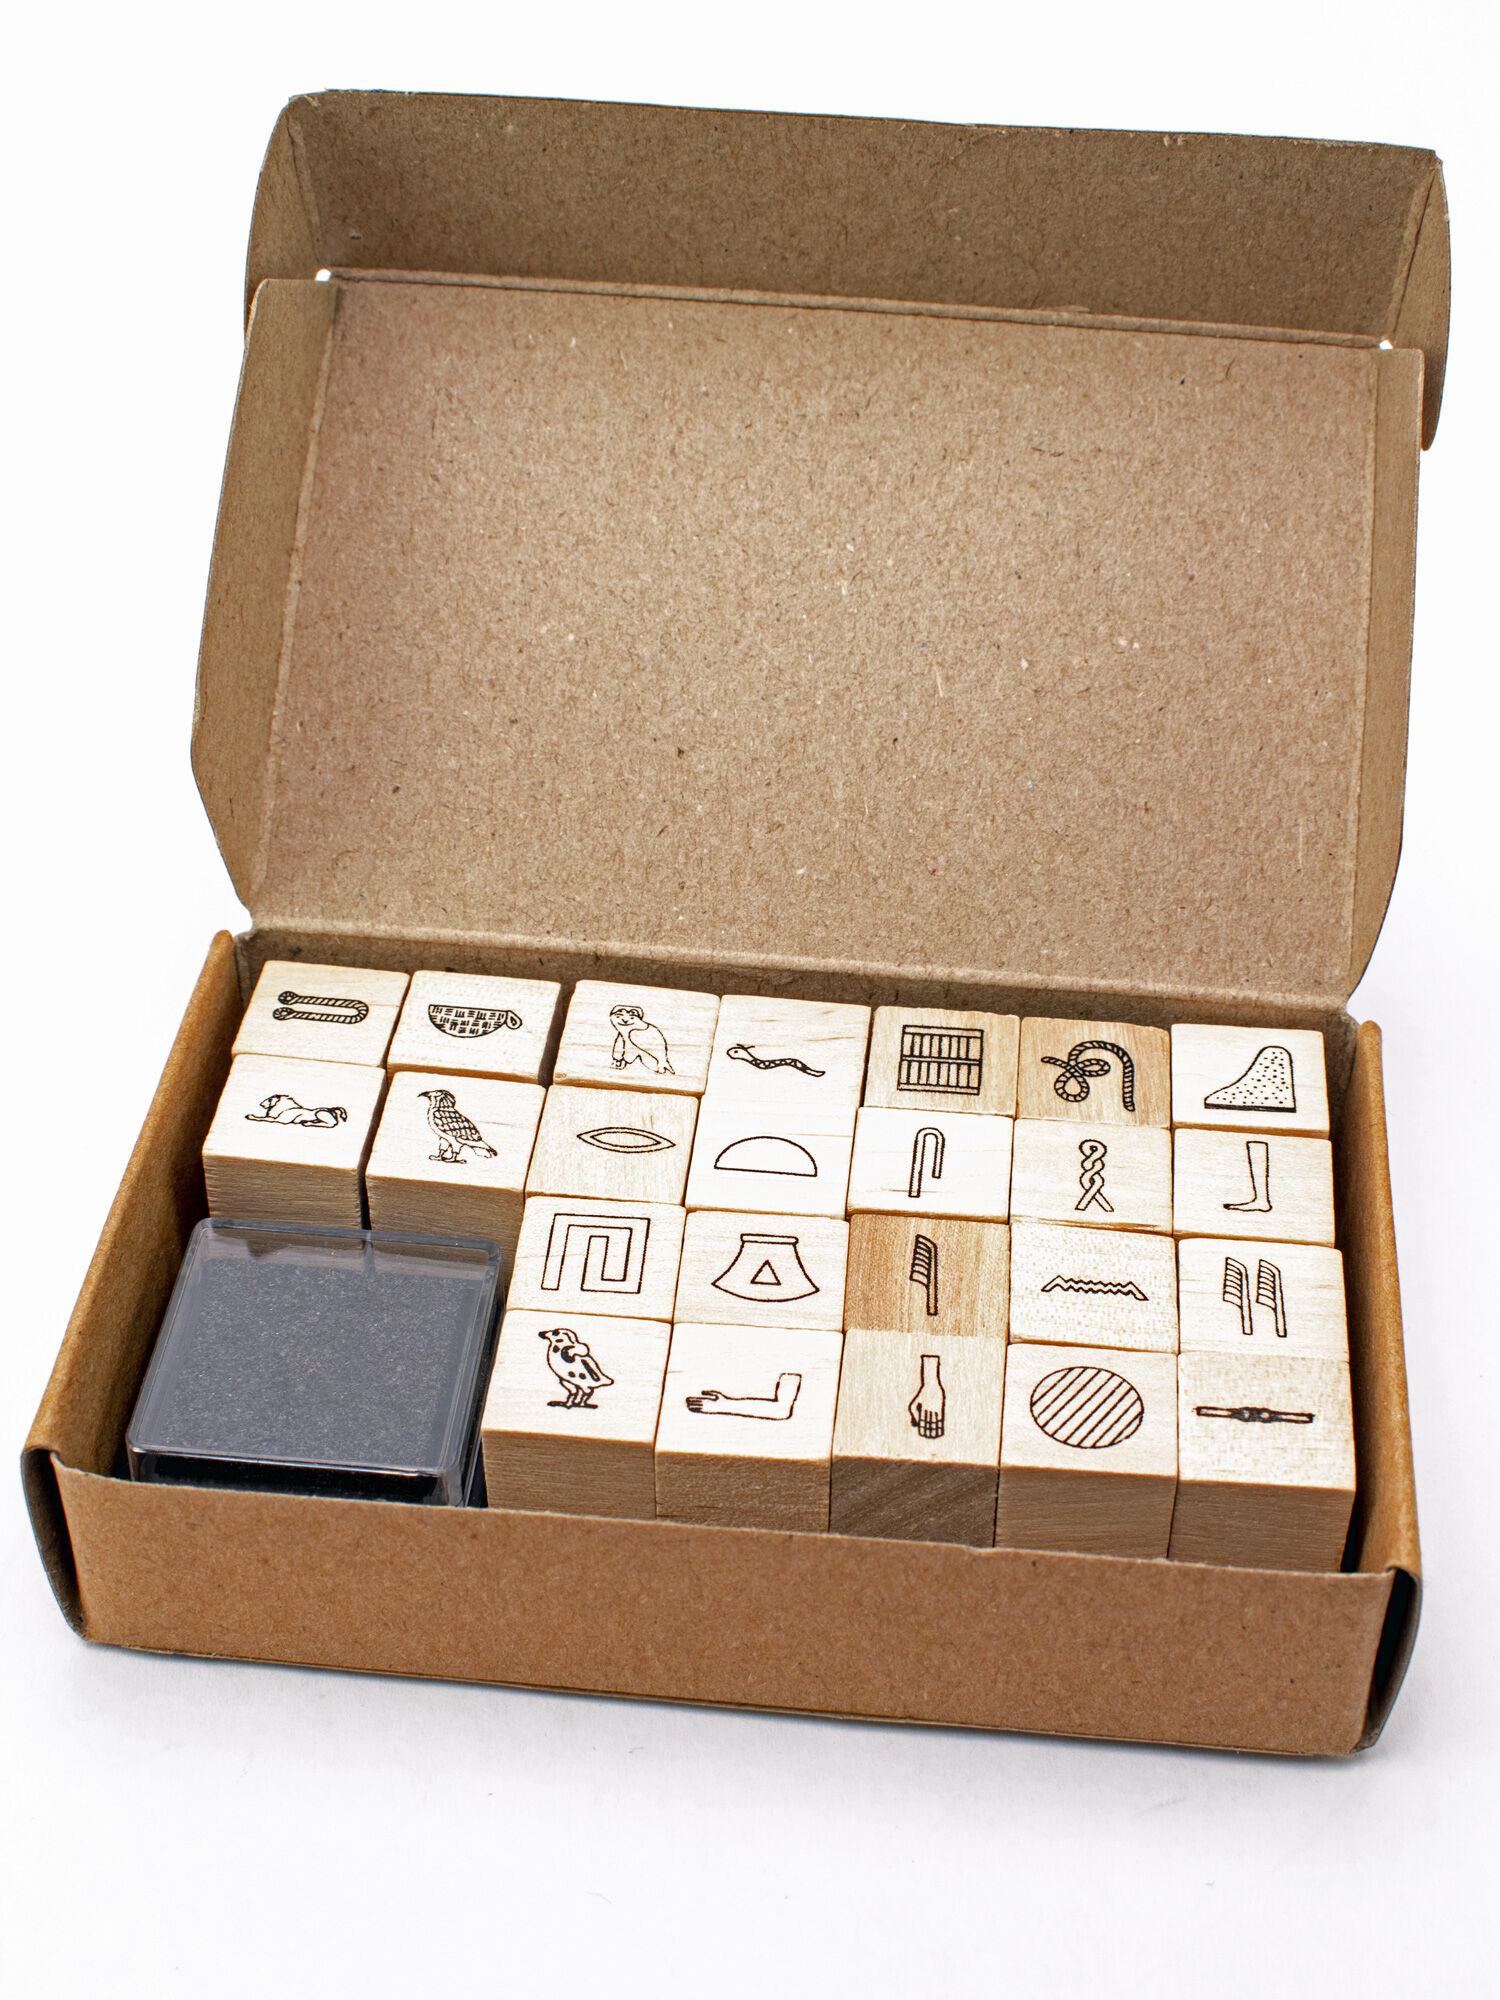 stamp set of 6 size 3/4x3/4 with wooden tray Egyptian hieroglyphic symbols Paper-Crafting 19mm Scrapbooking Card Making